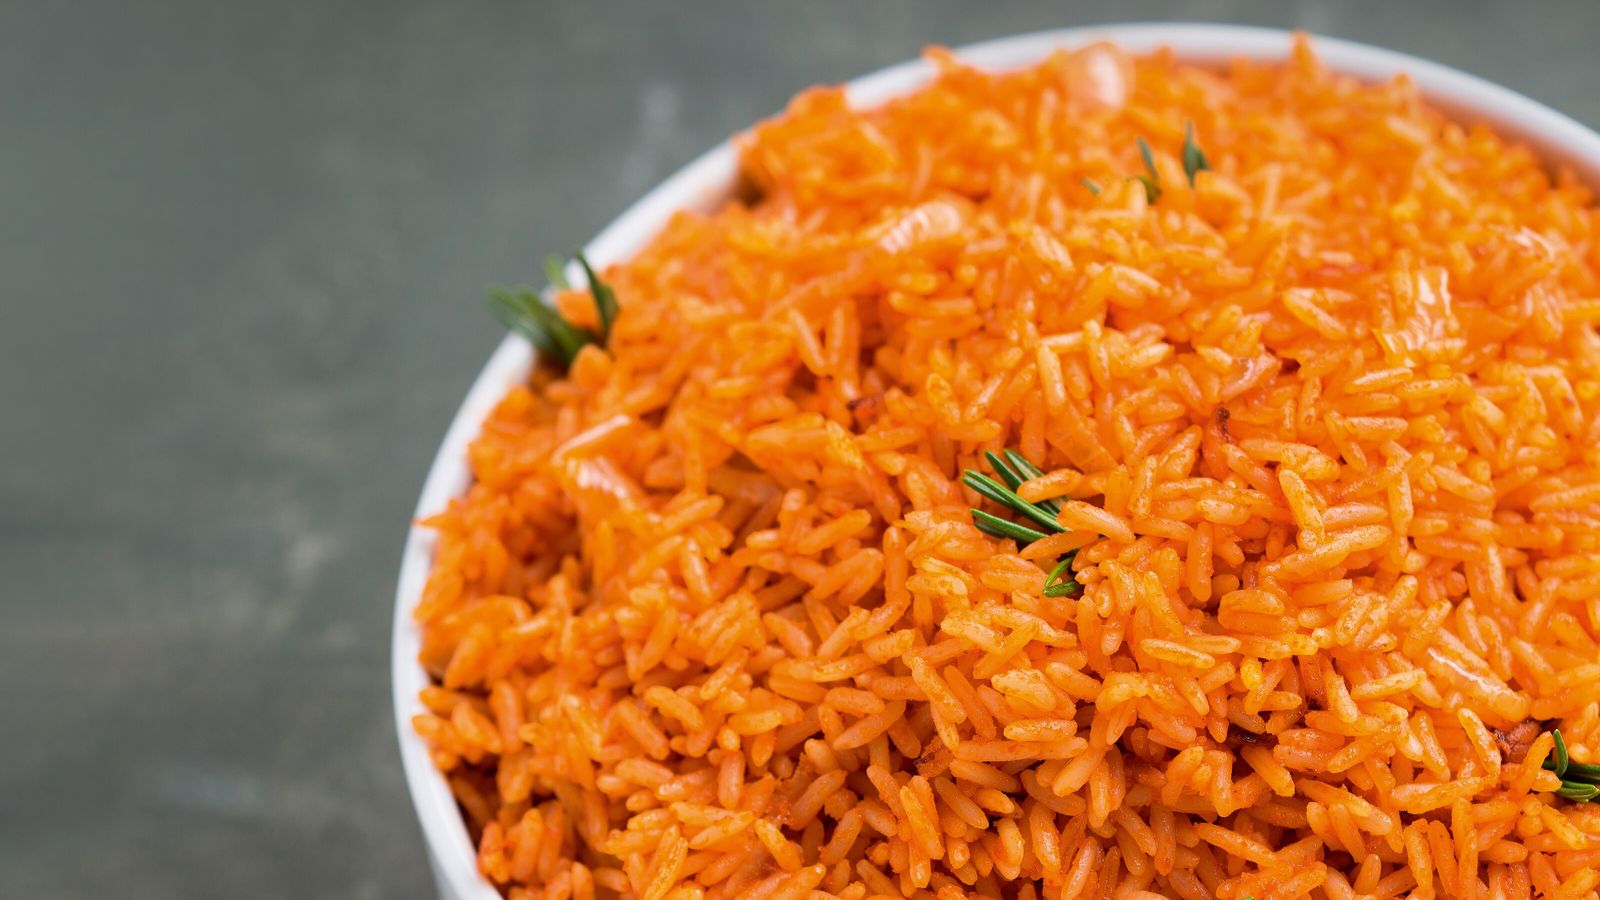 Conclusion of the West Africa Jollof (rice) Wars?